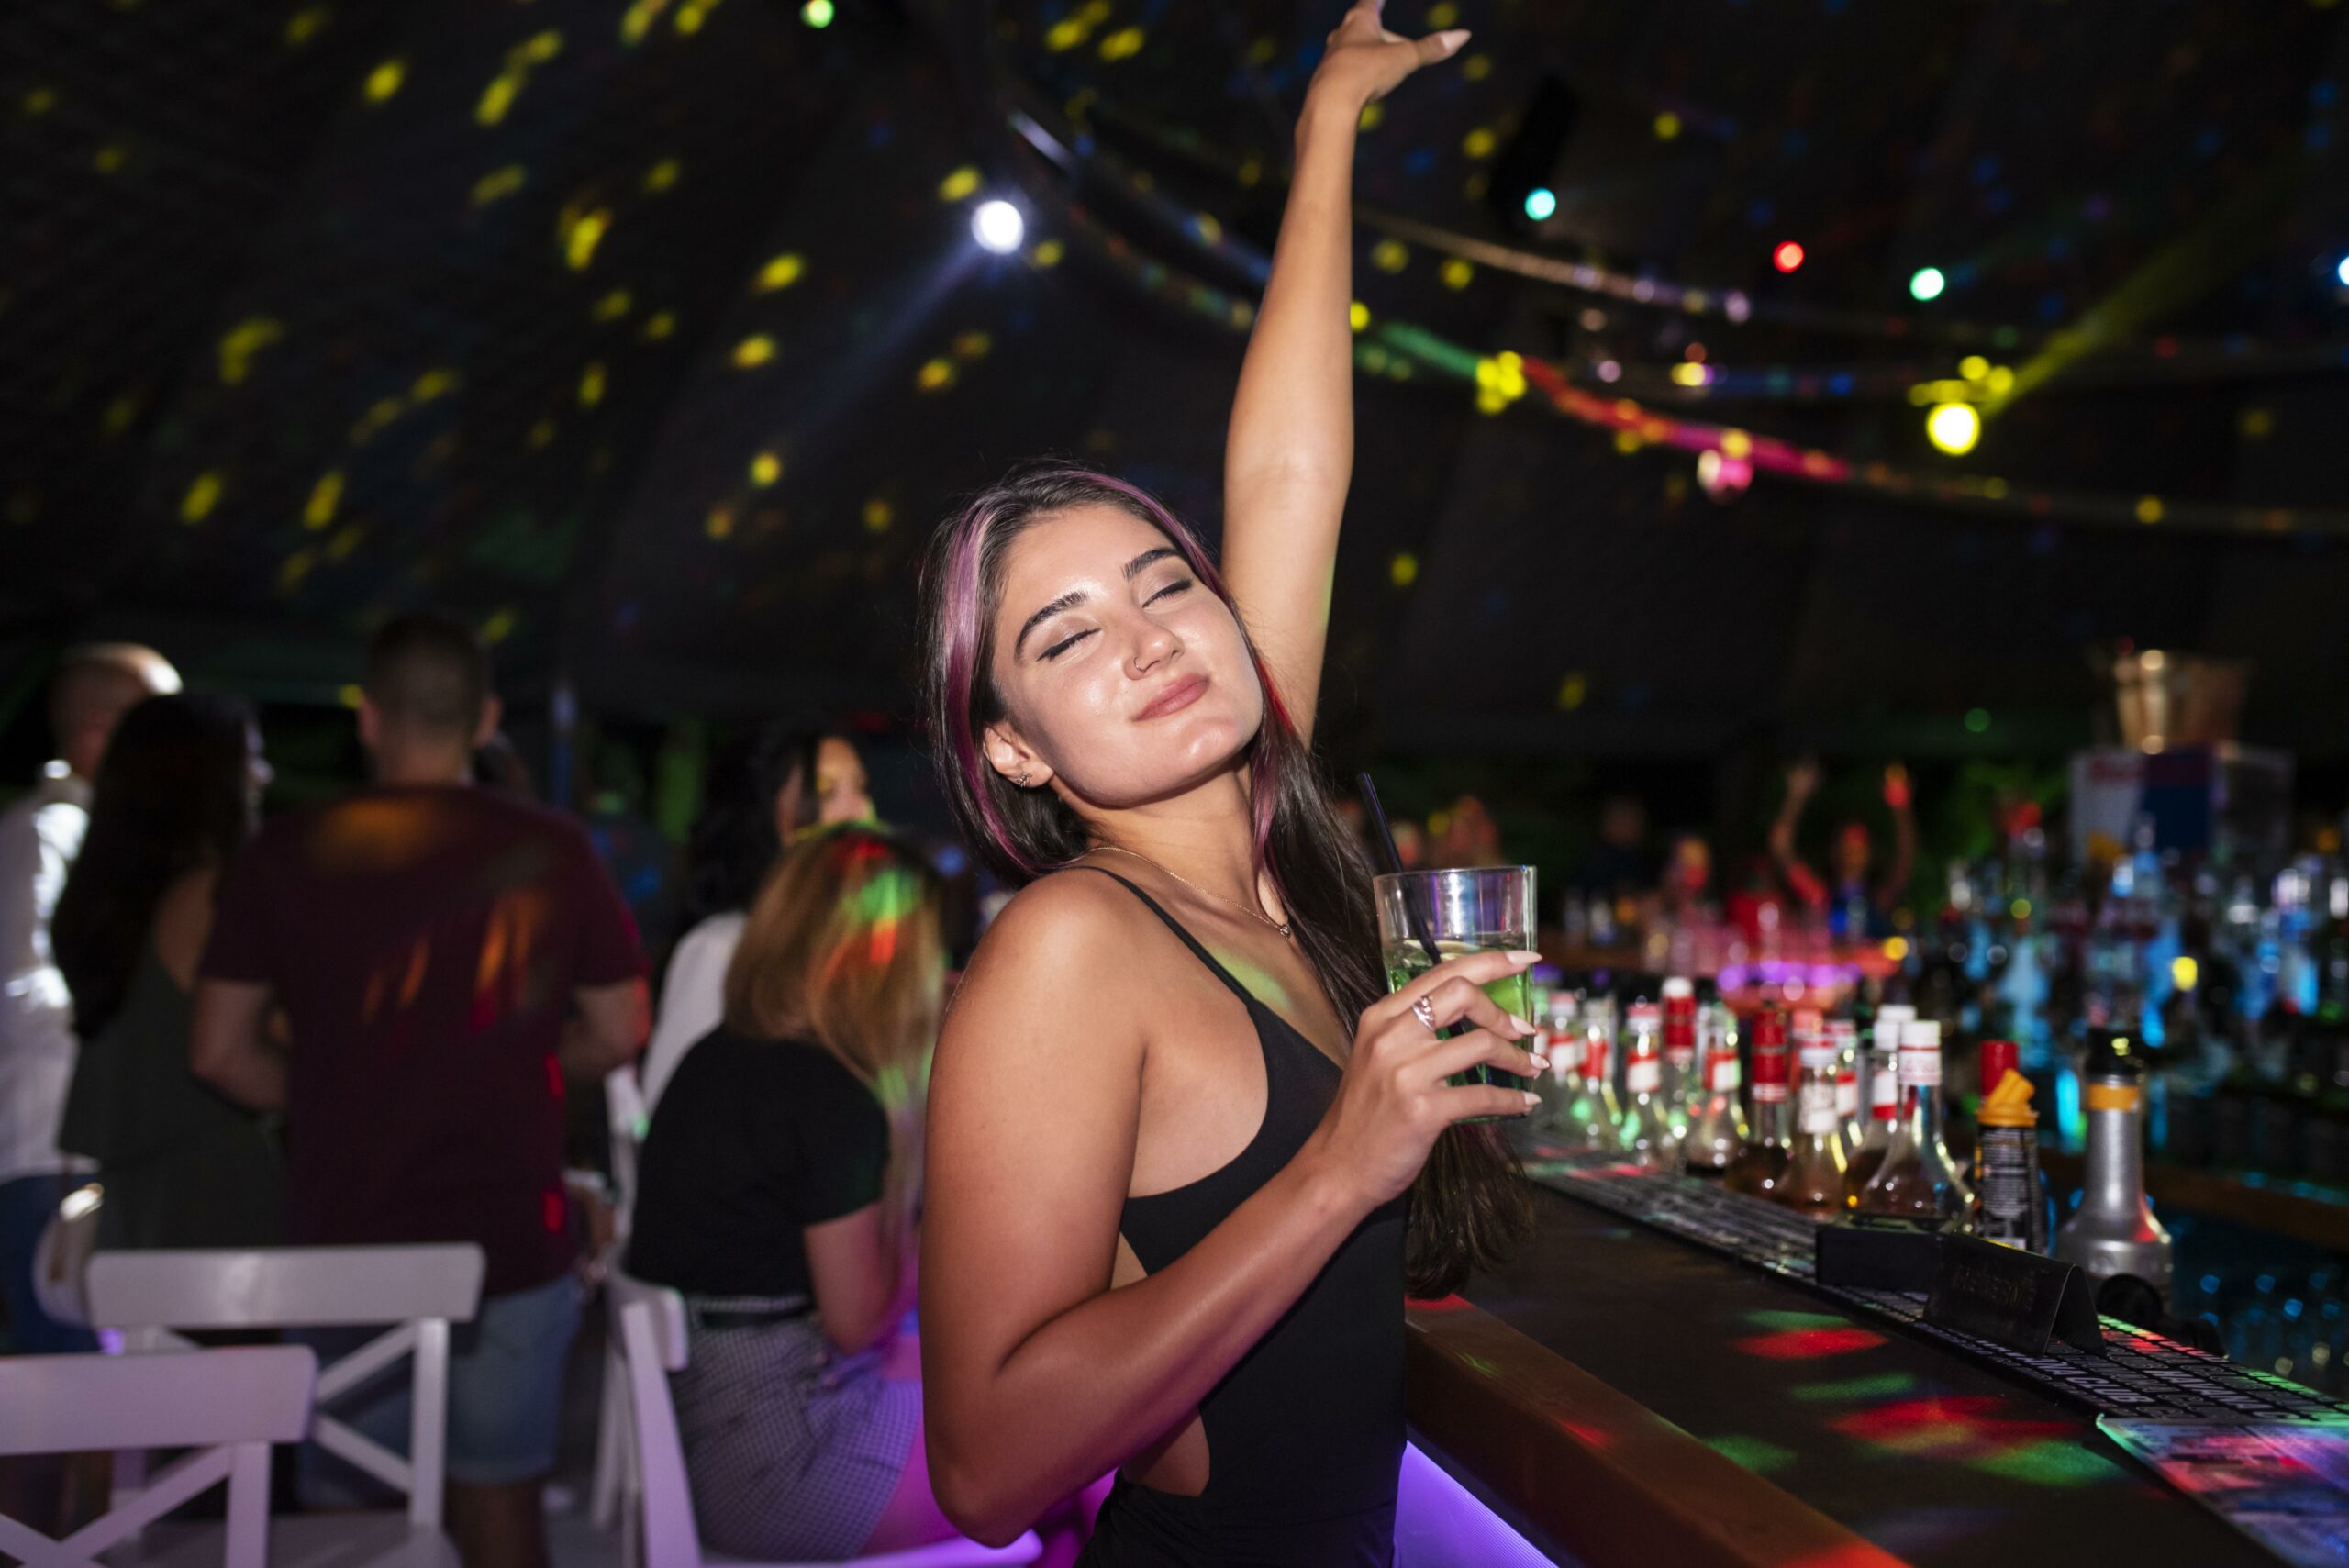 Girl smiling and enjoying a cocktail at an outdoor bar in cancun , nightime